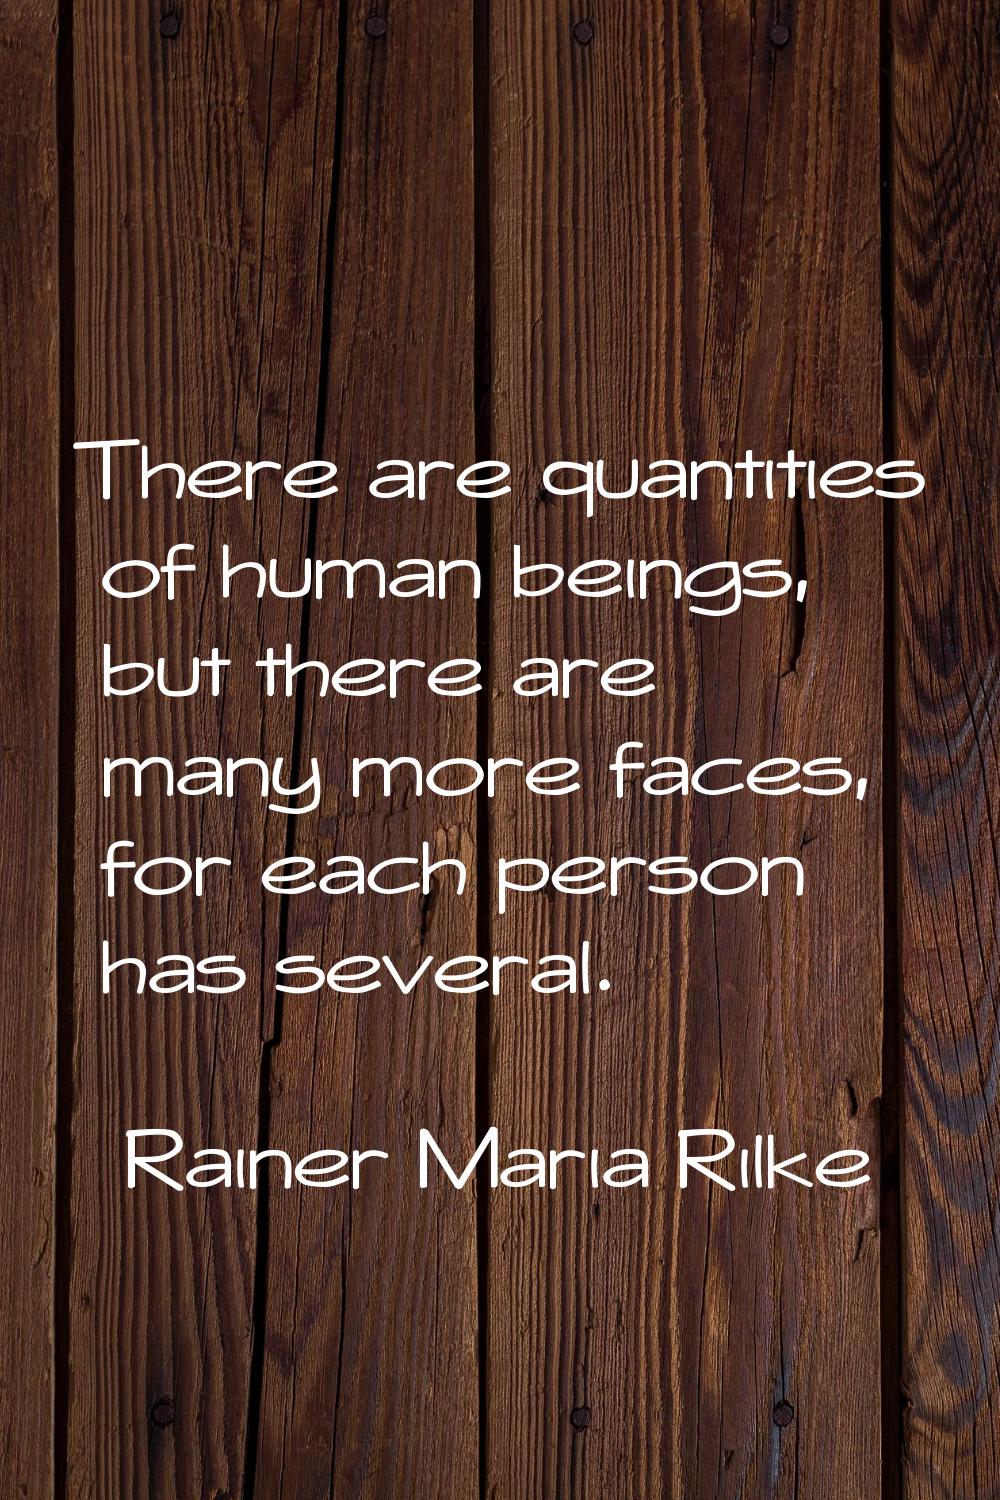 There are quantities of human beings, but there are many more faces, for each person has several.